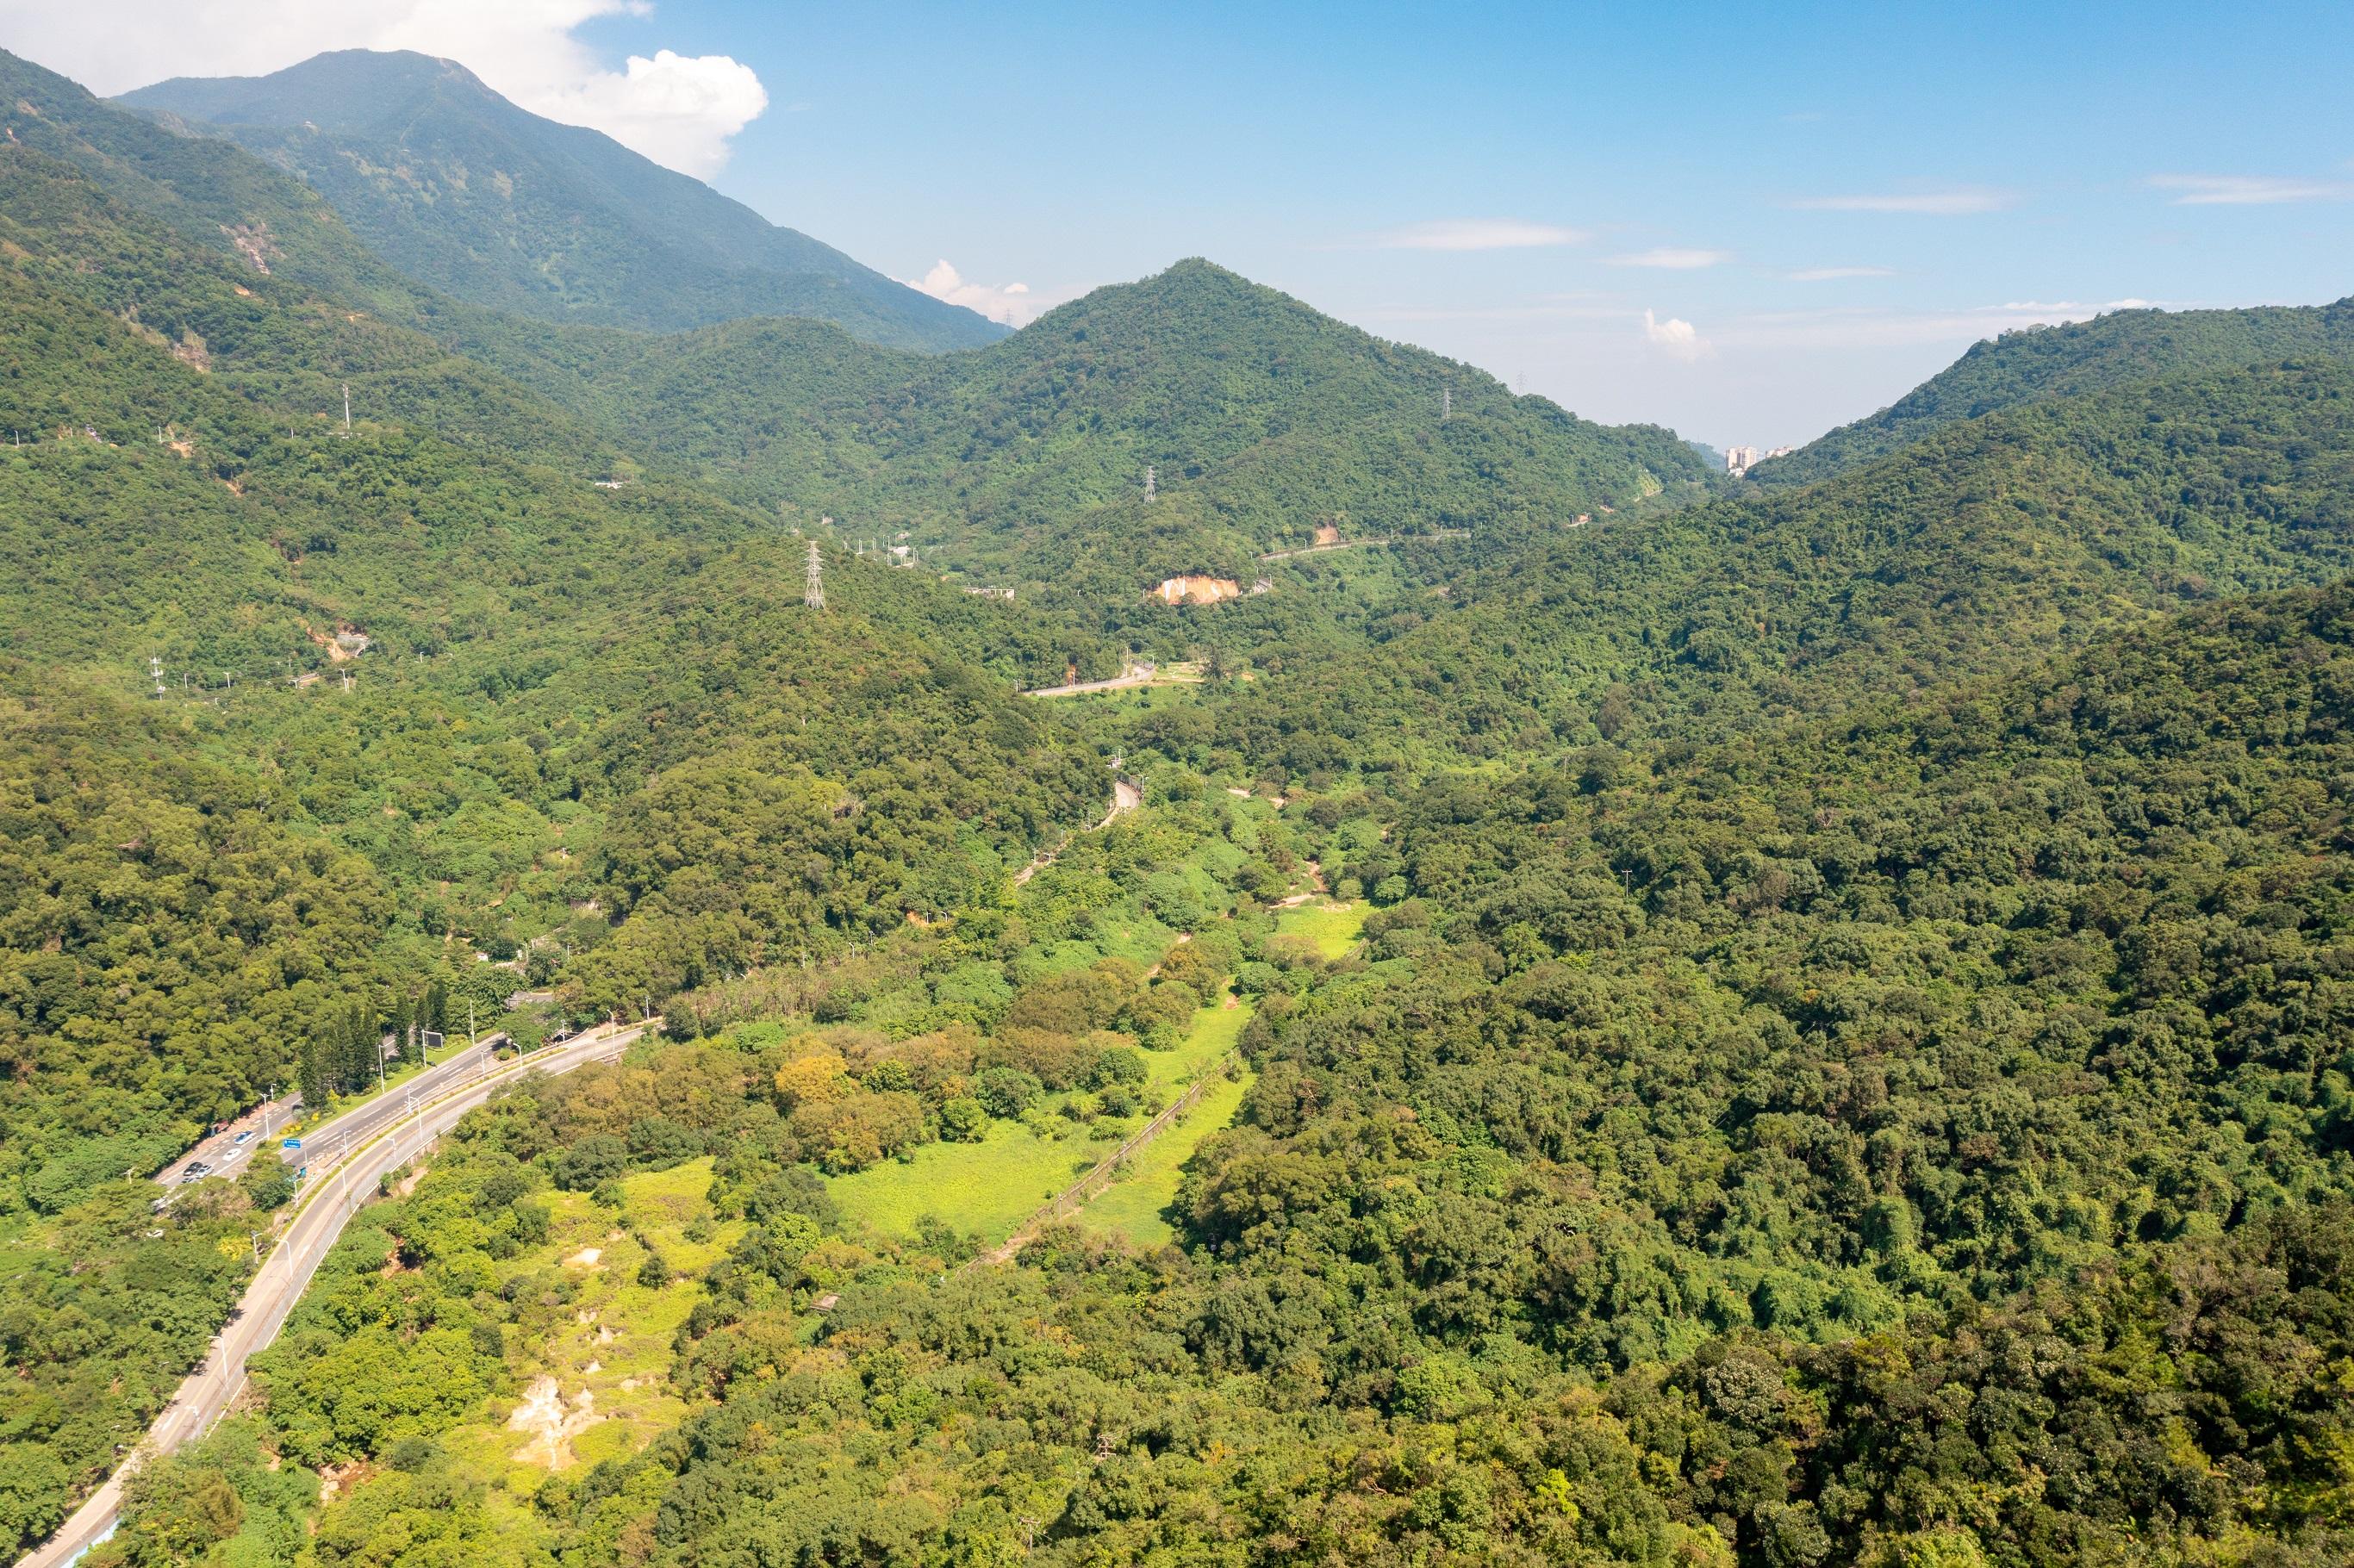 The Agriculture, Fisheries and Conservation Department announced today (March 1) that Robin's Nest Country Park was established the same day. Photo shows Robin's Nest linked with Shenzhen Wutong Mountain.

